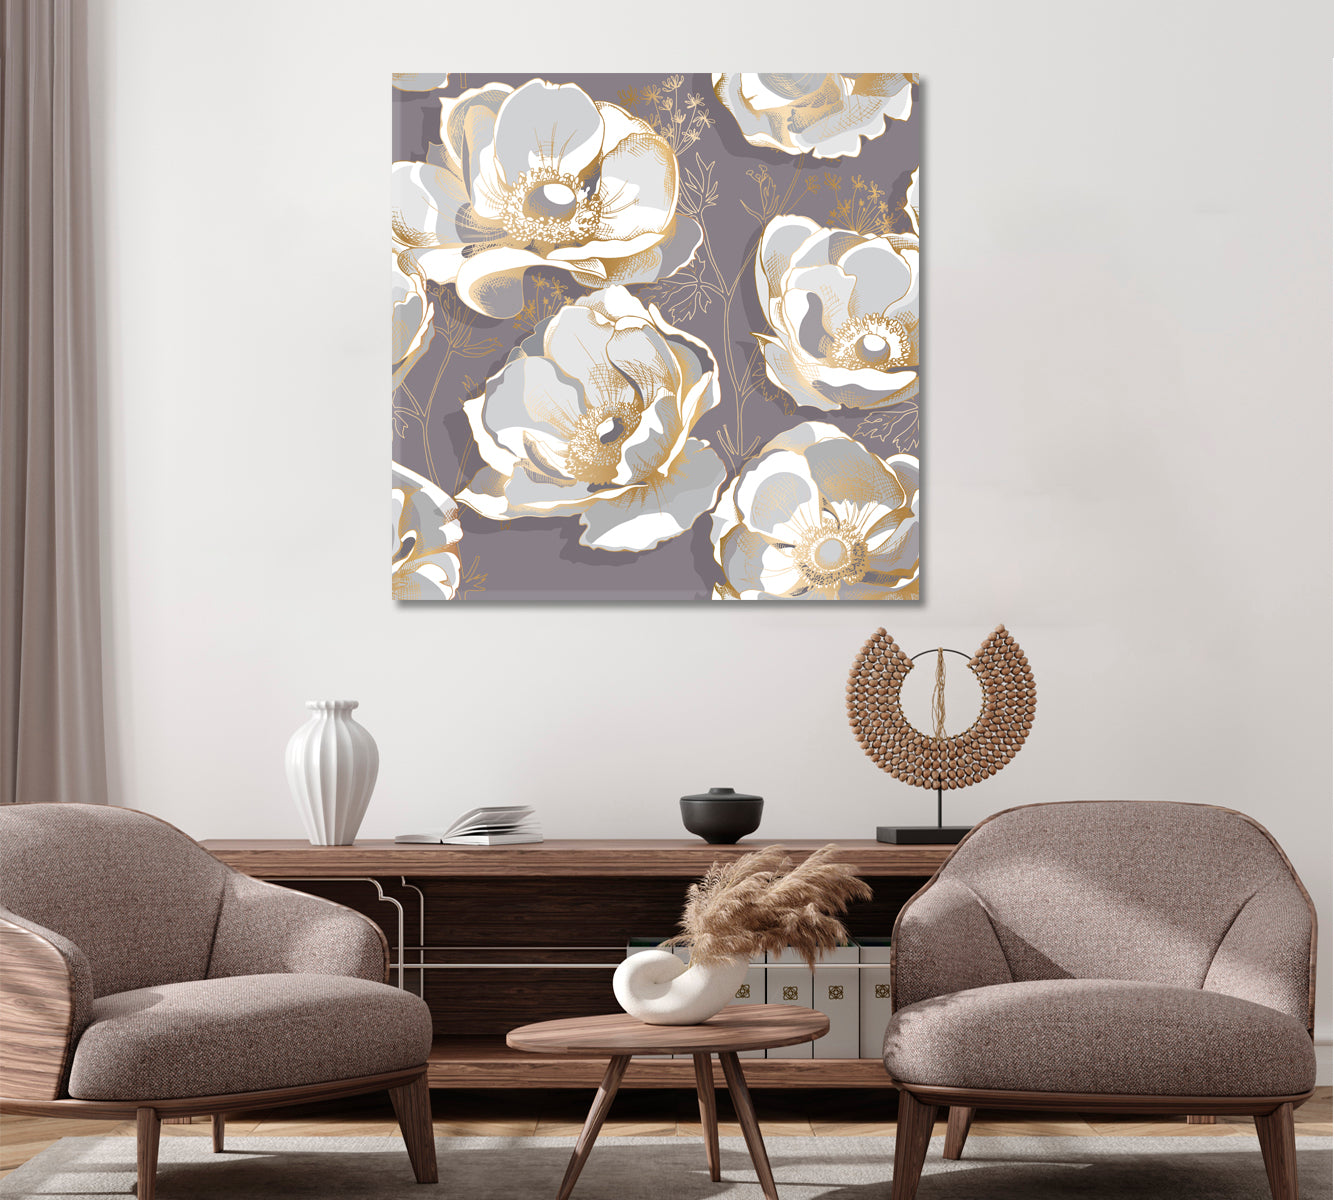 Anemone Flowers Canvas Print ArtLexy 1 Panel 12"x12" inches 